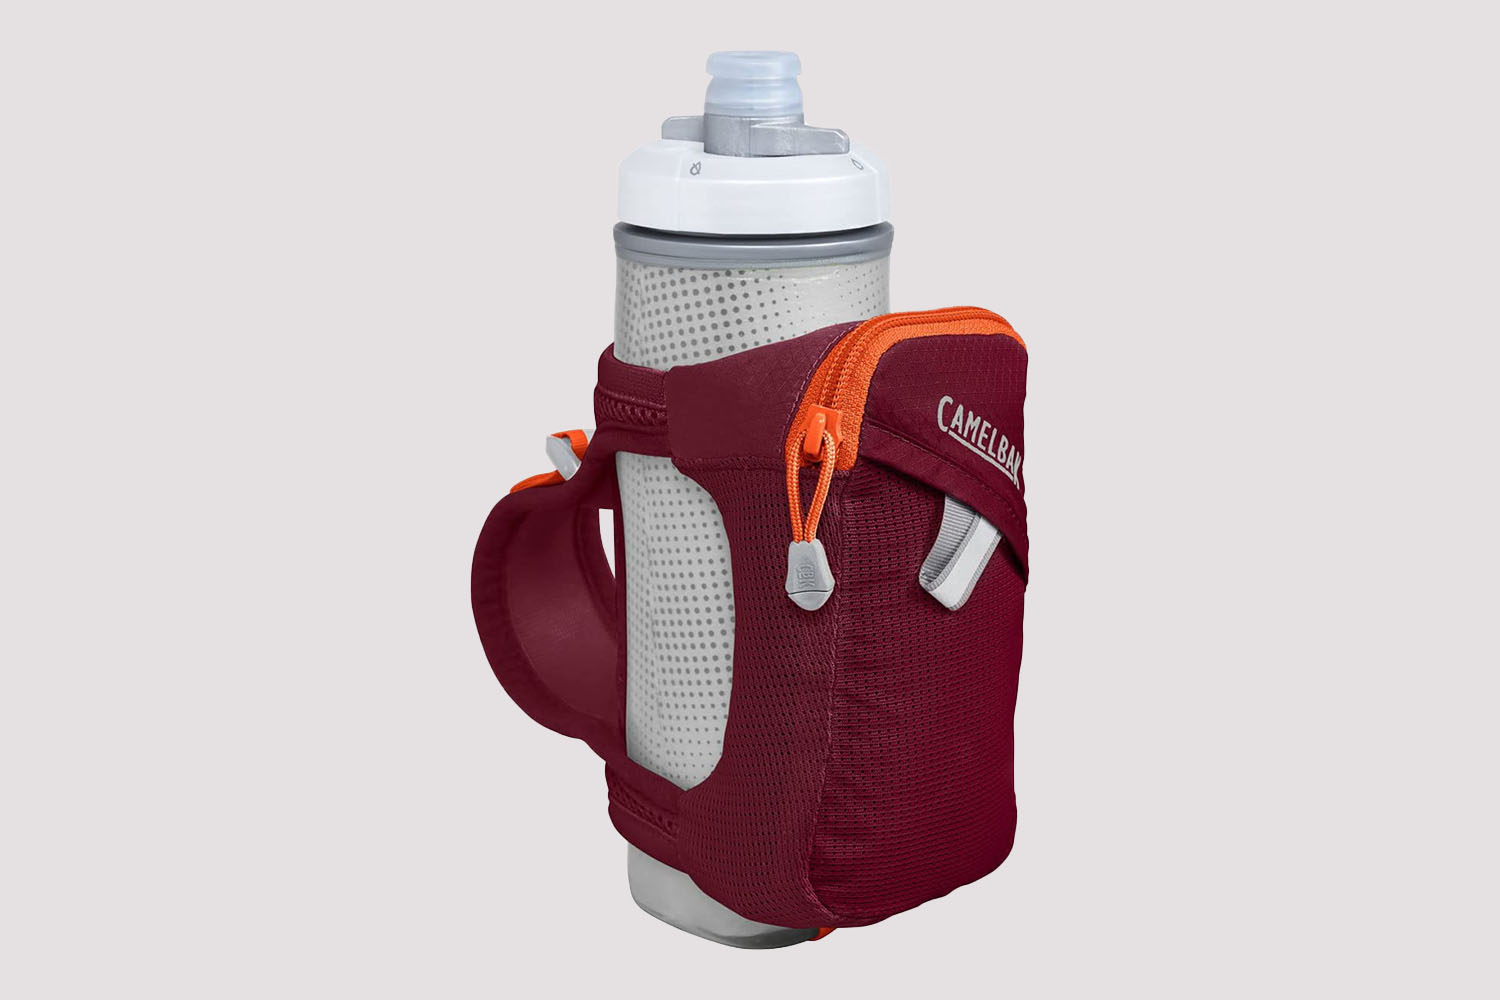 a Camelbak water-bottle in a red running holster on a grey background